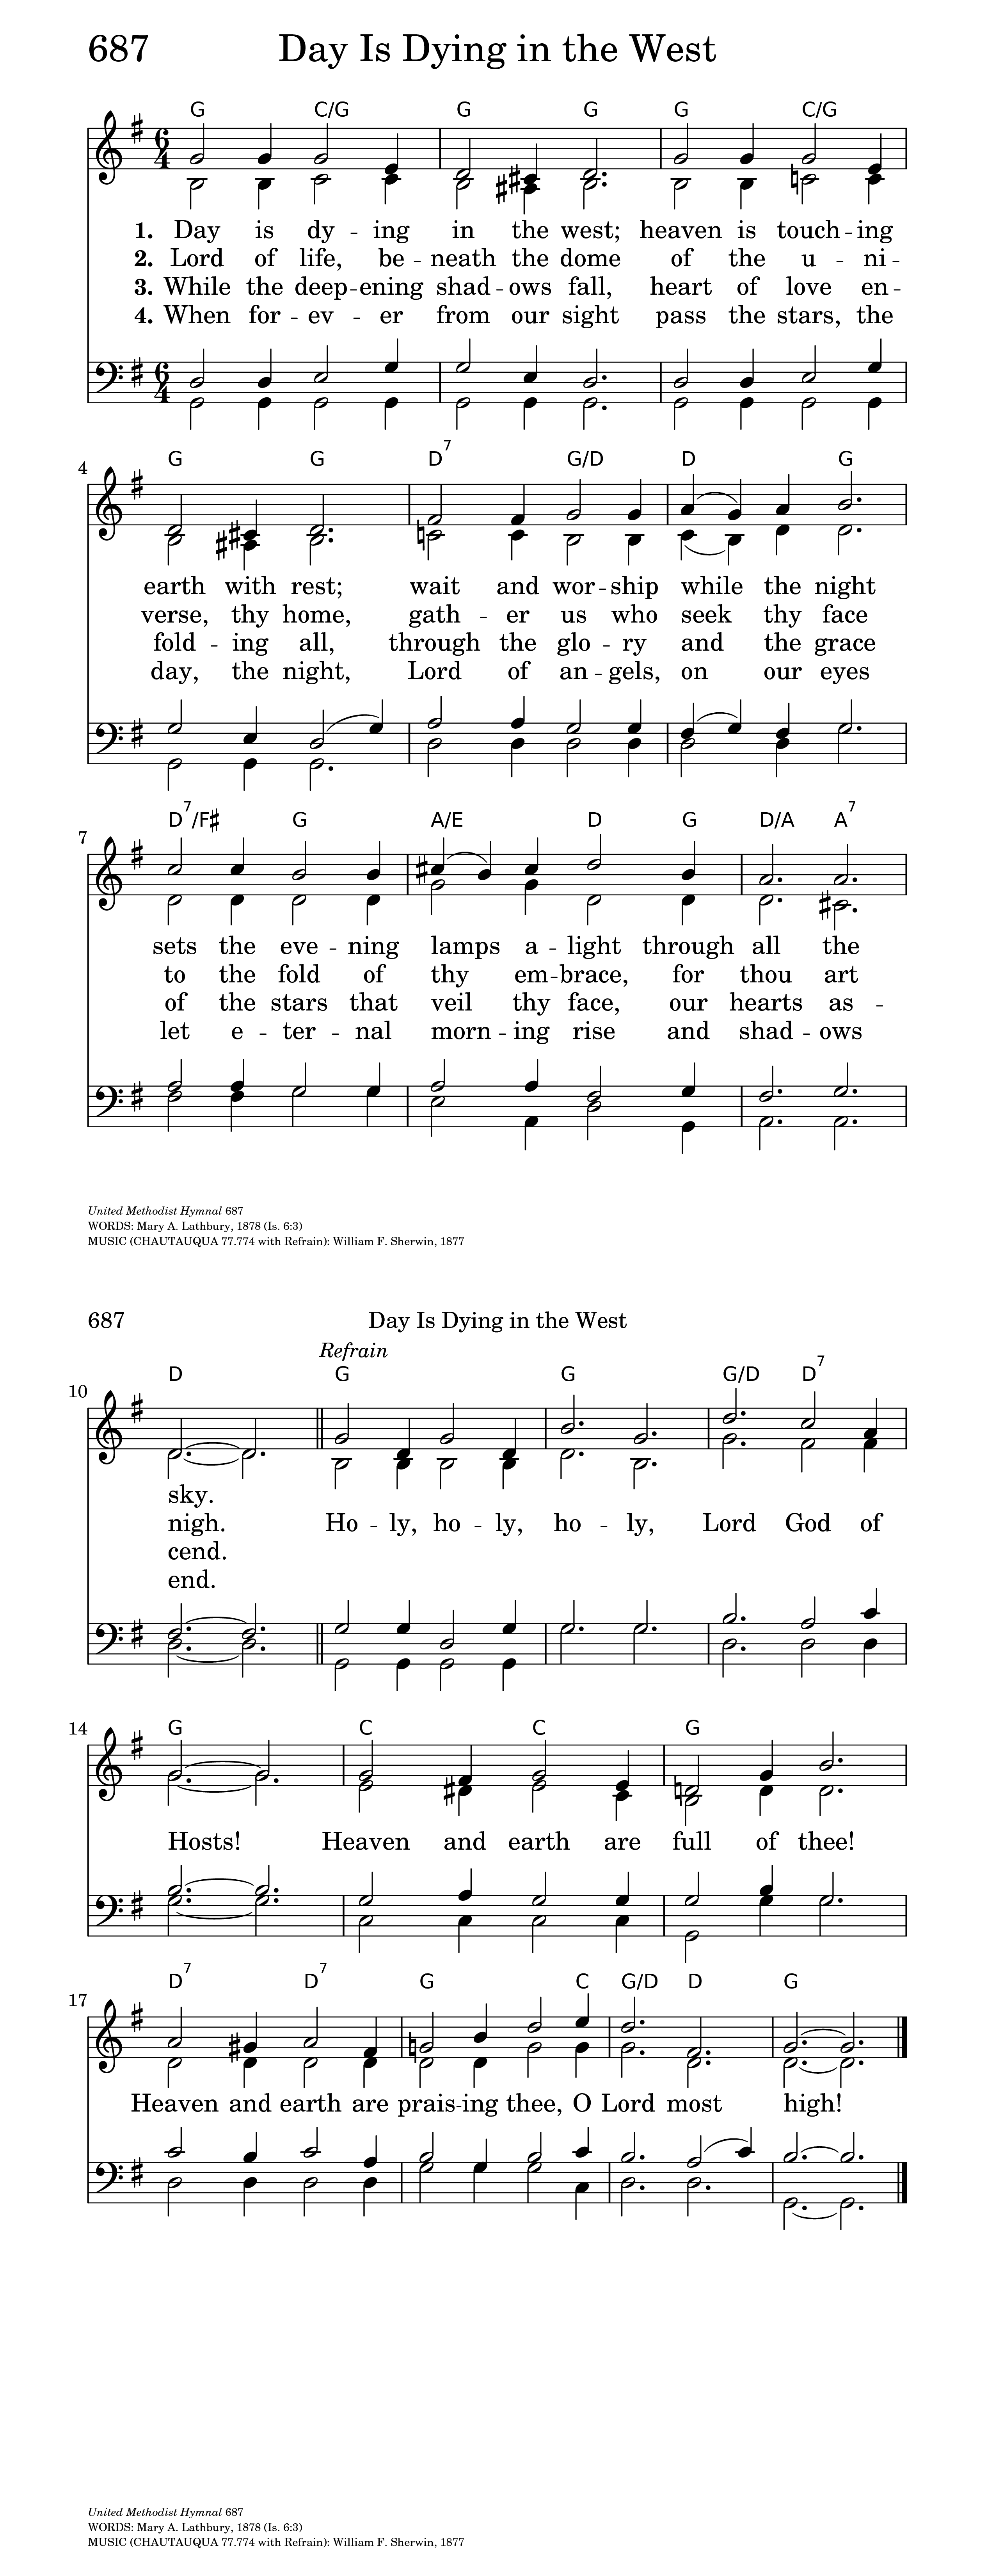 Day Is Dying in the West | Hymnary.org